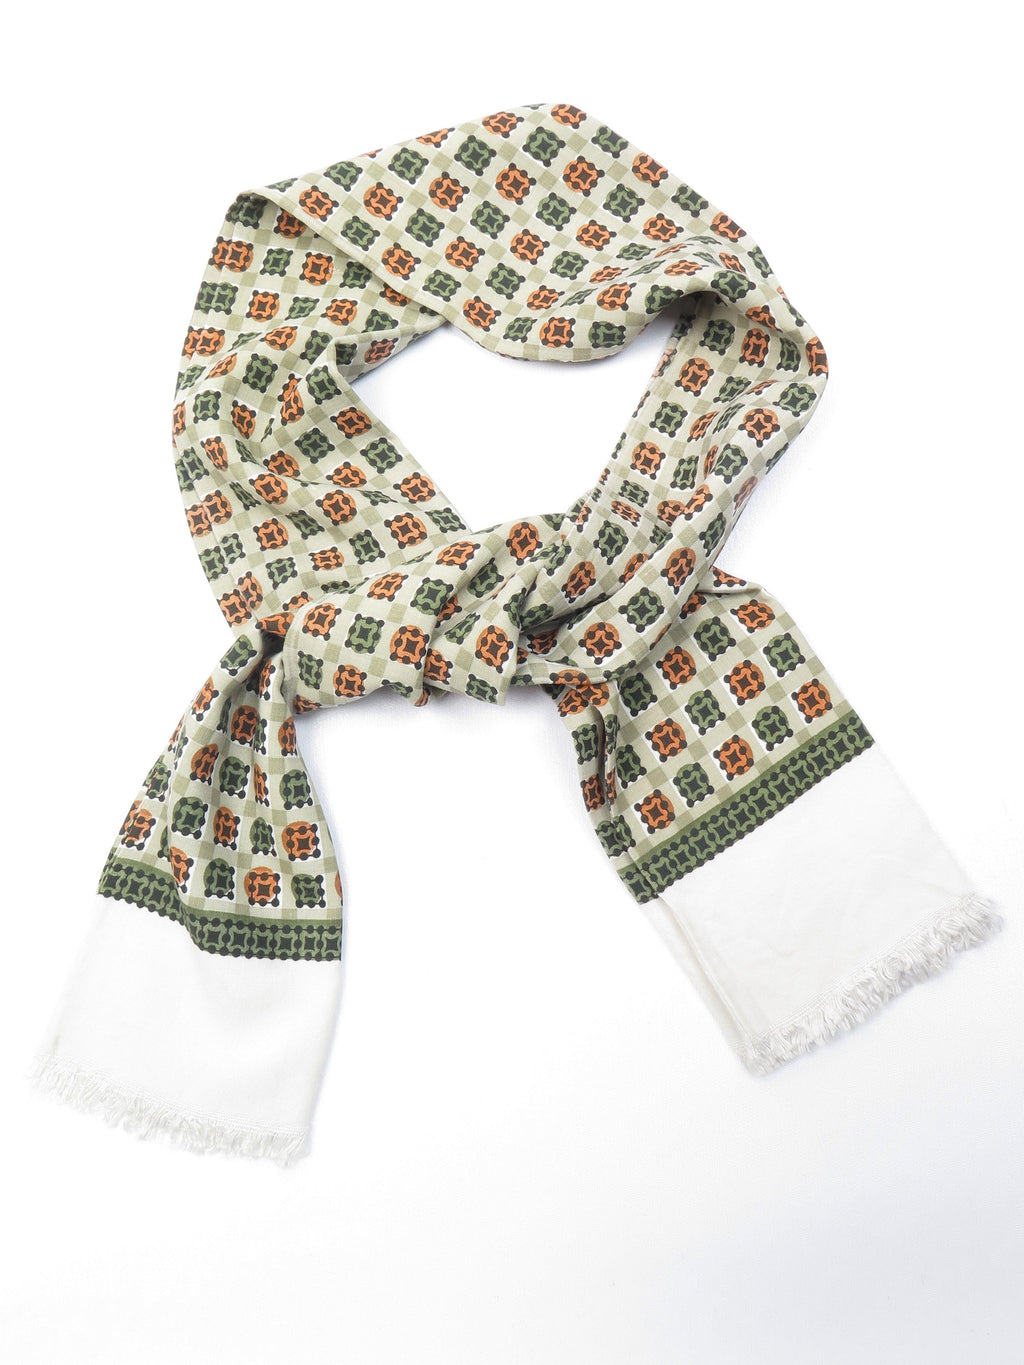 Classic Vintage Green Printed Cravat Style Scarf - The Harlequin